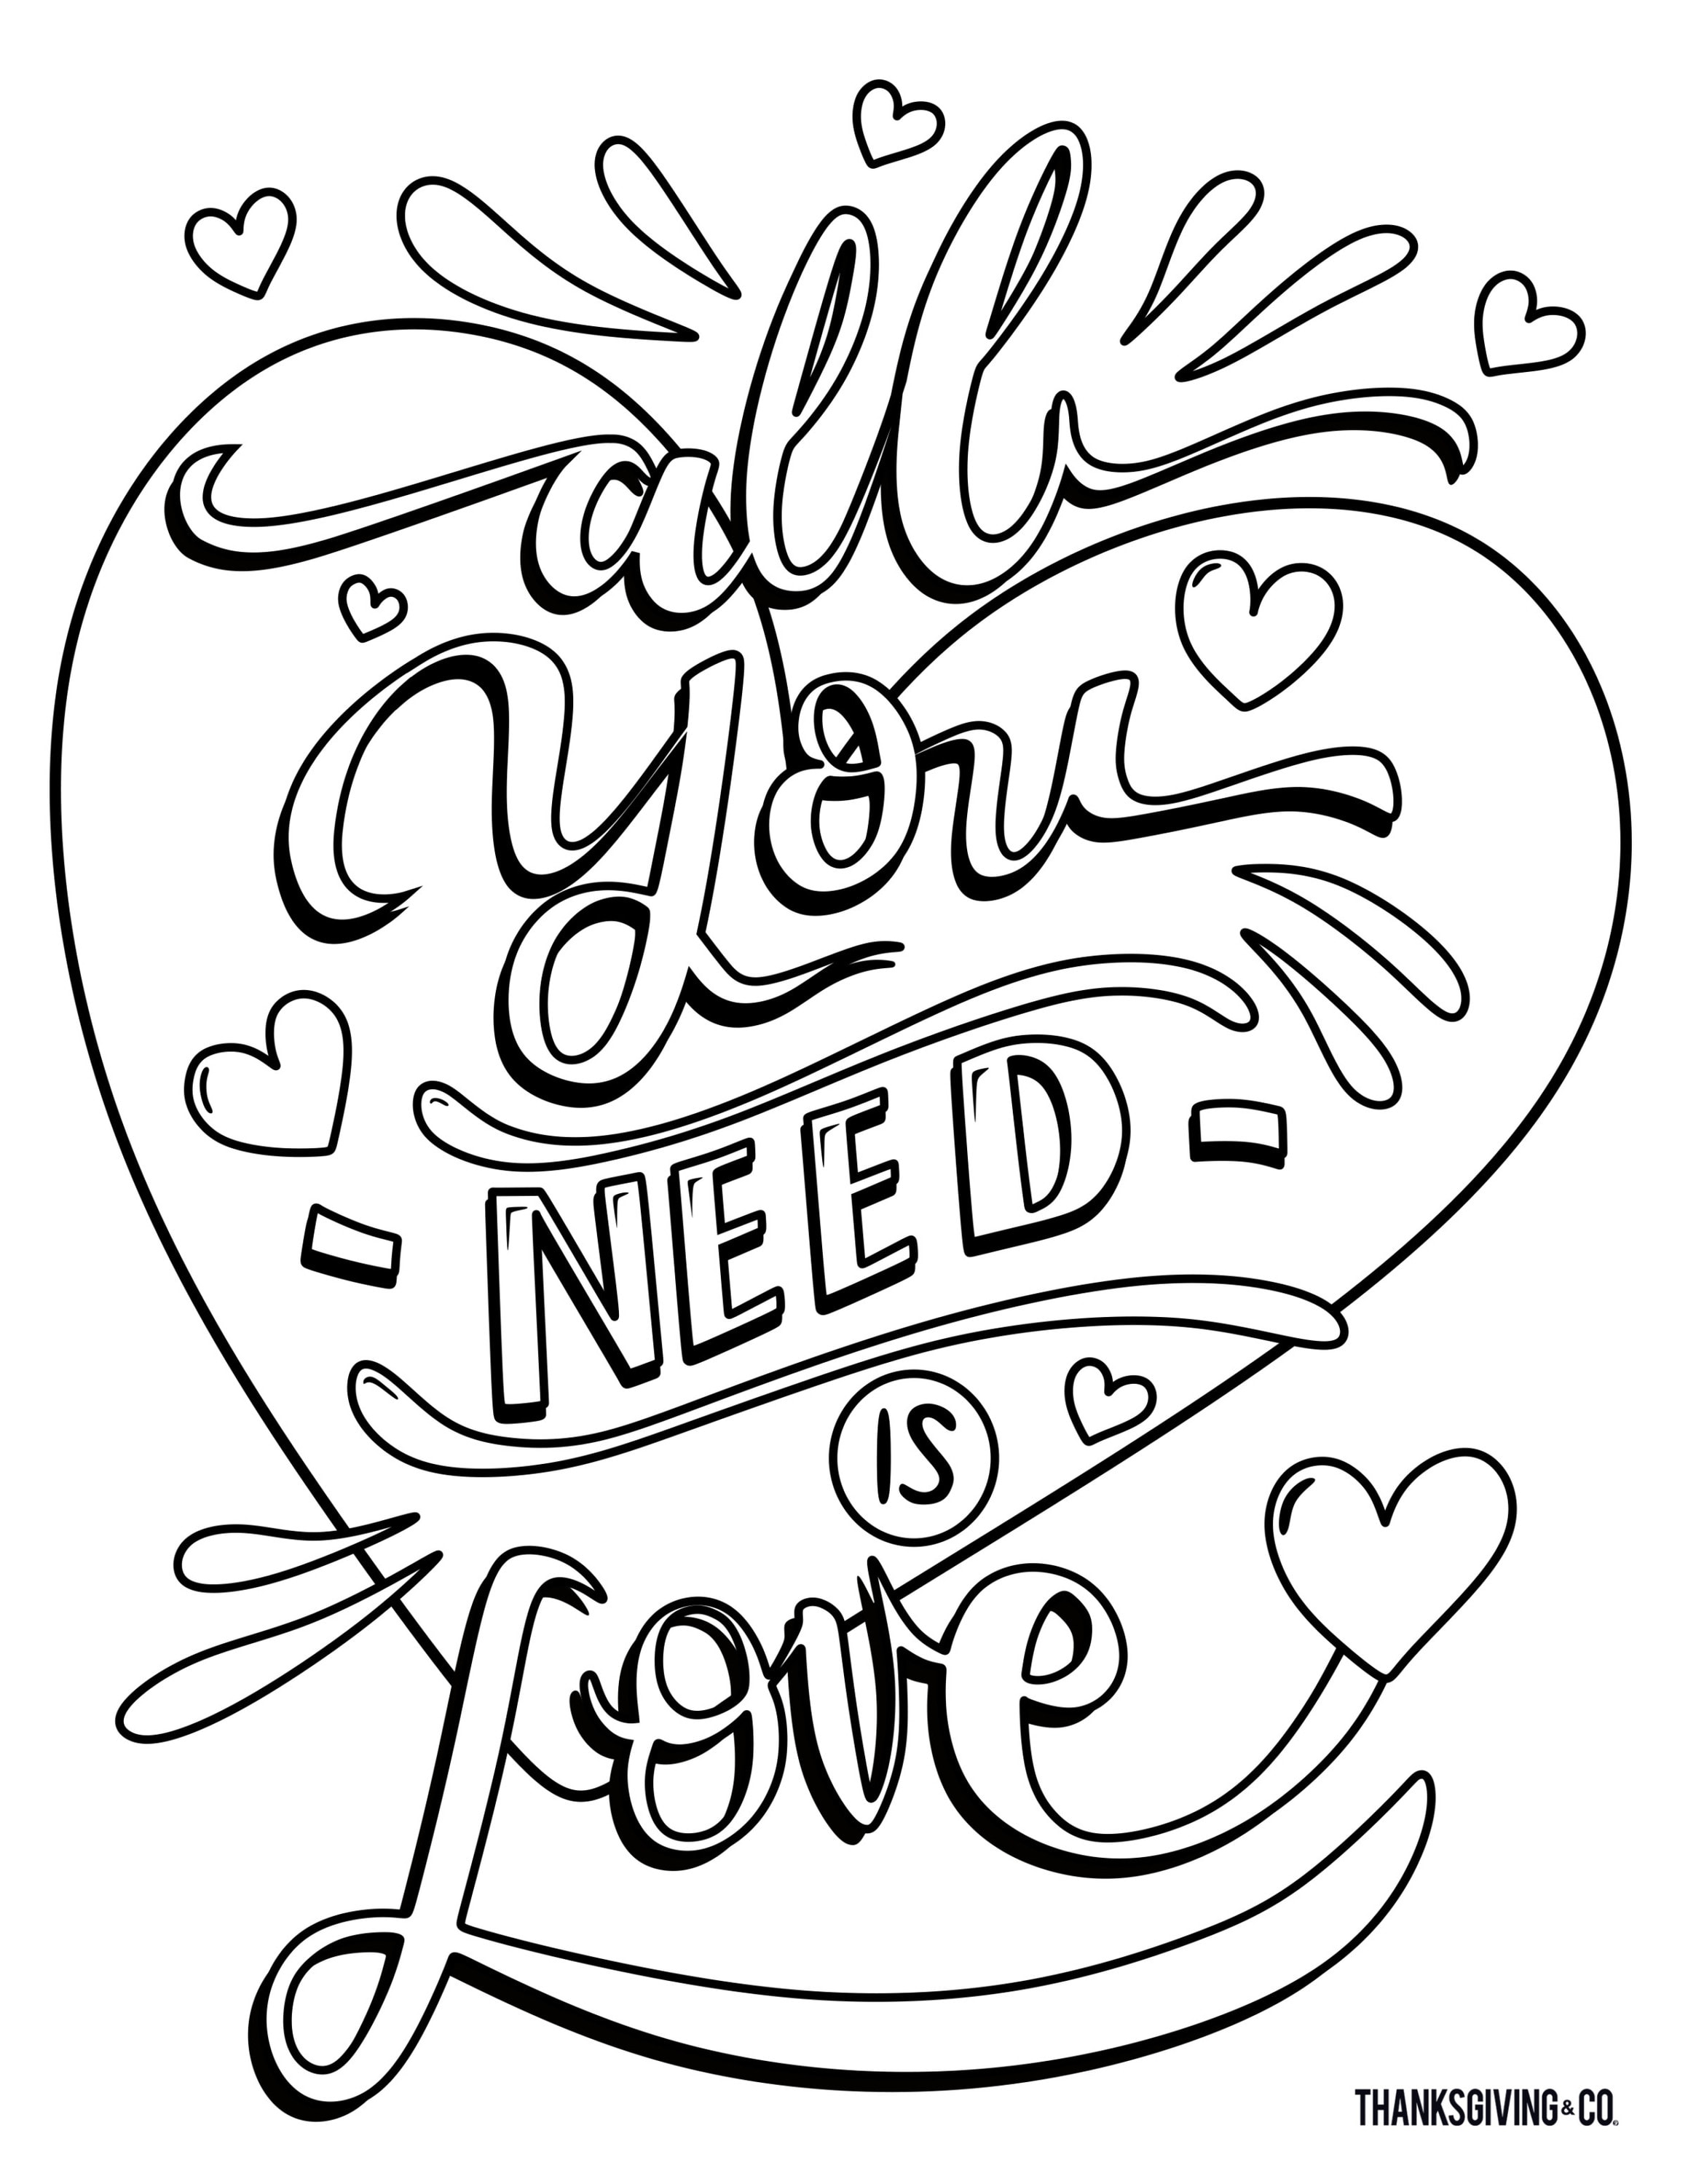 4 Free Adult Coloring Pages For Valentine s Day That Will Bring Out 